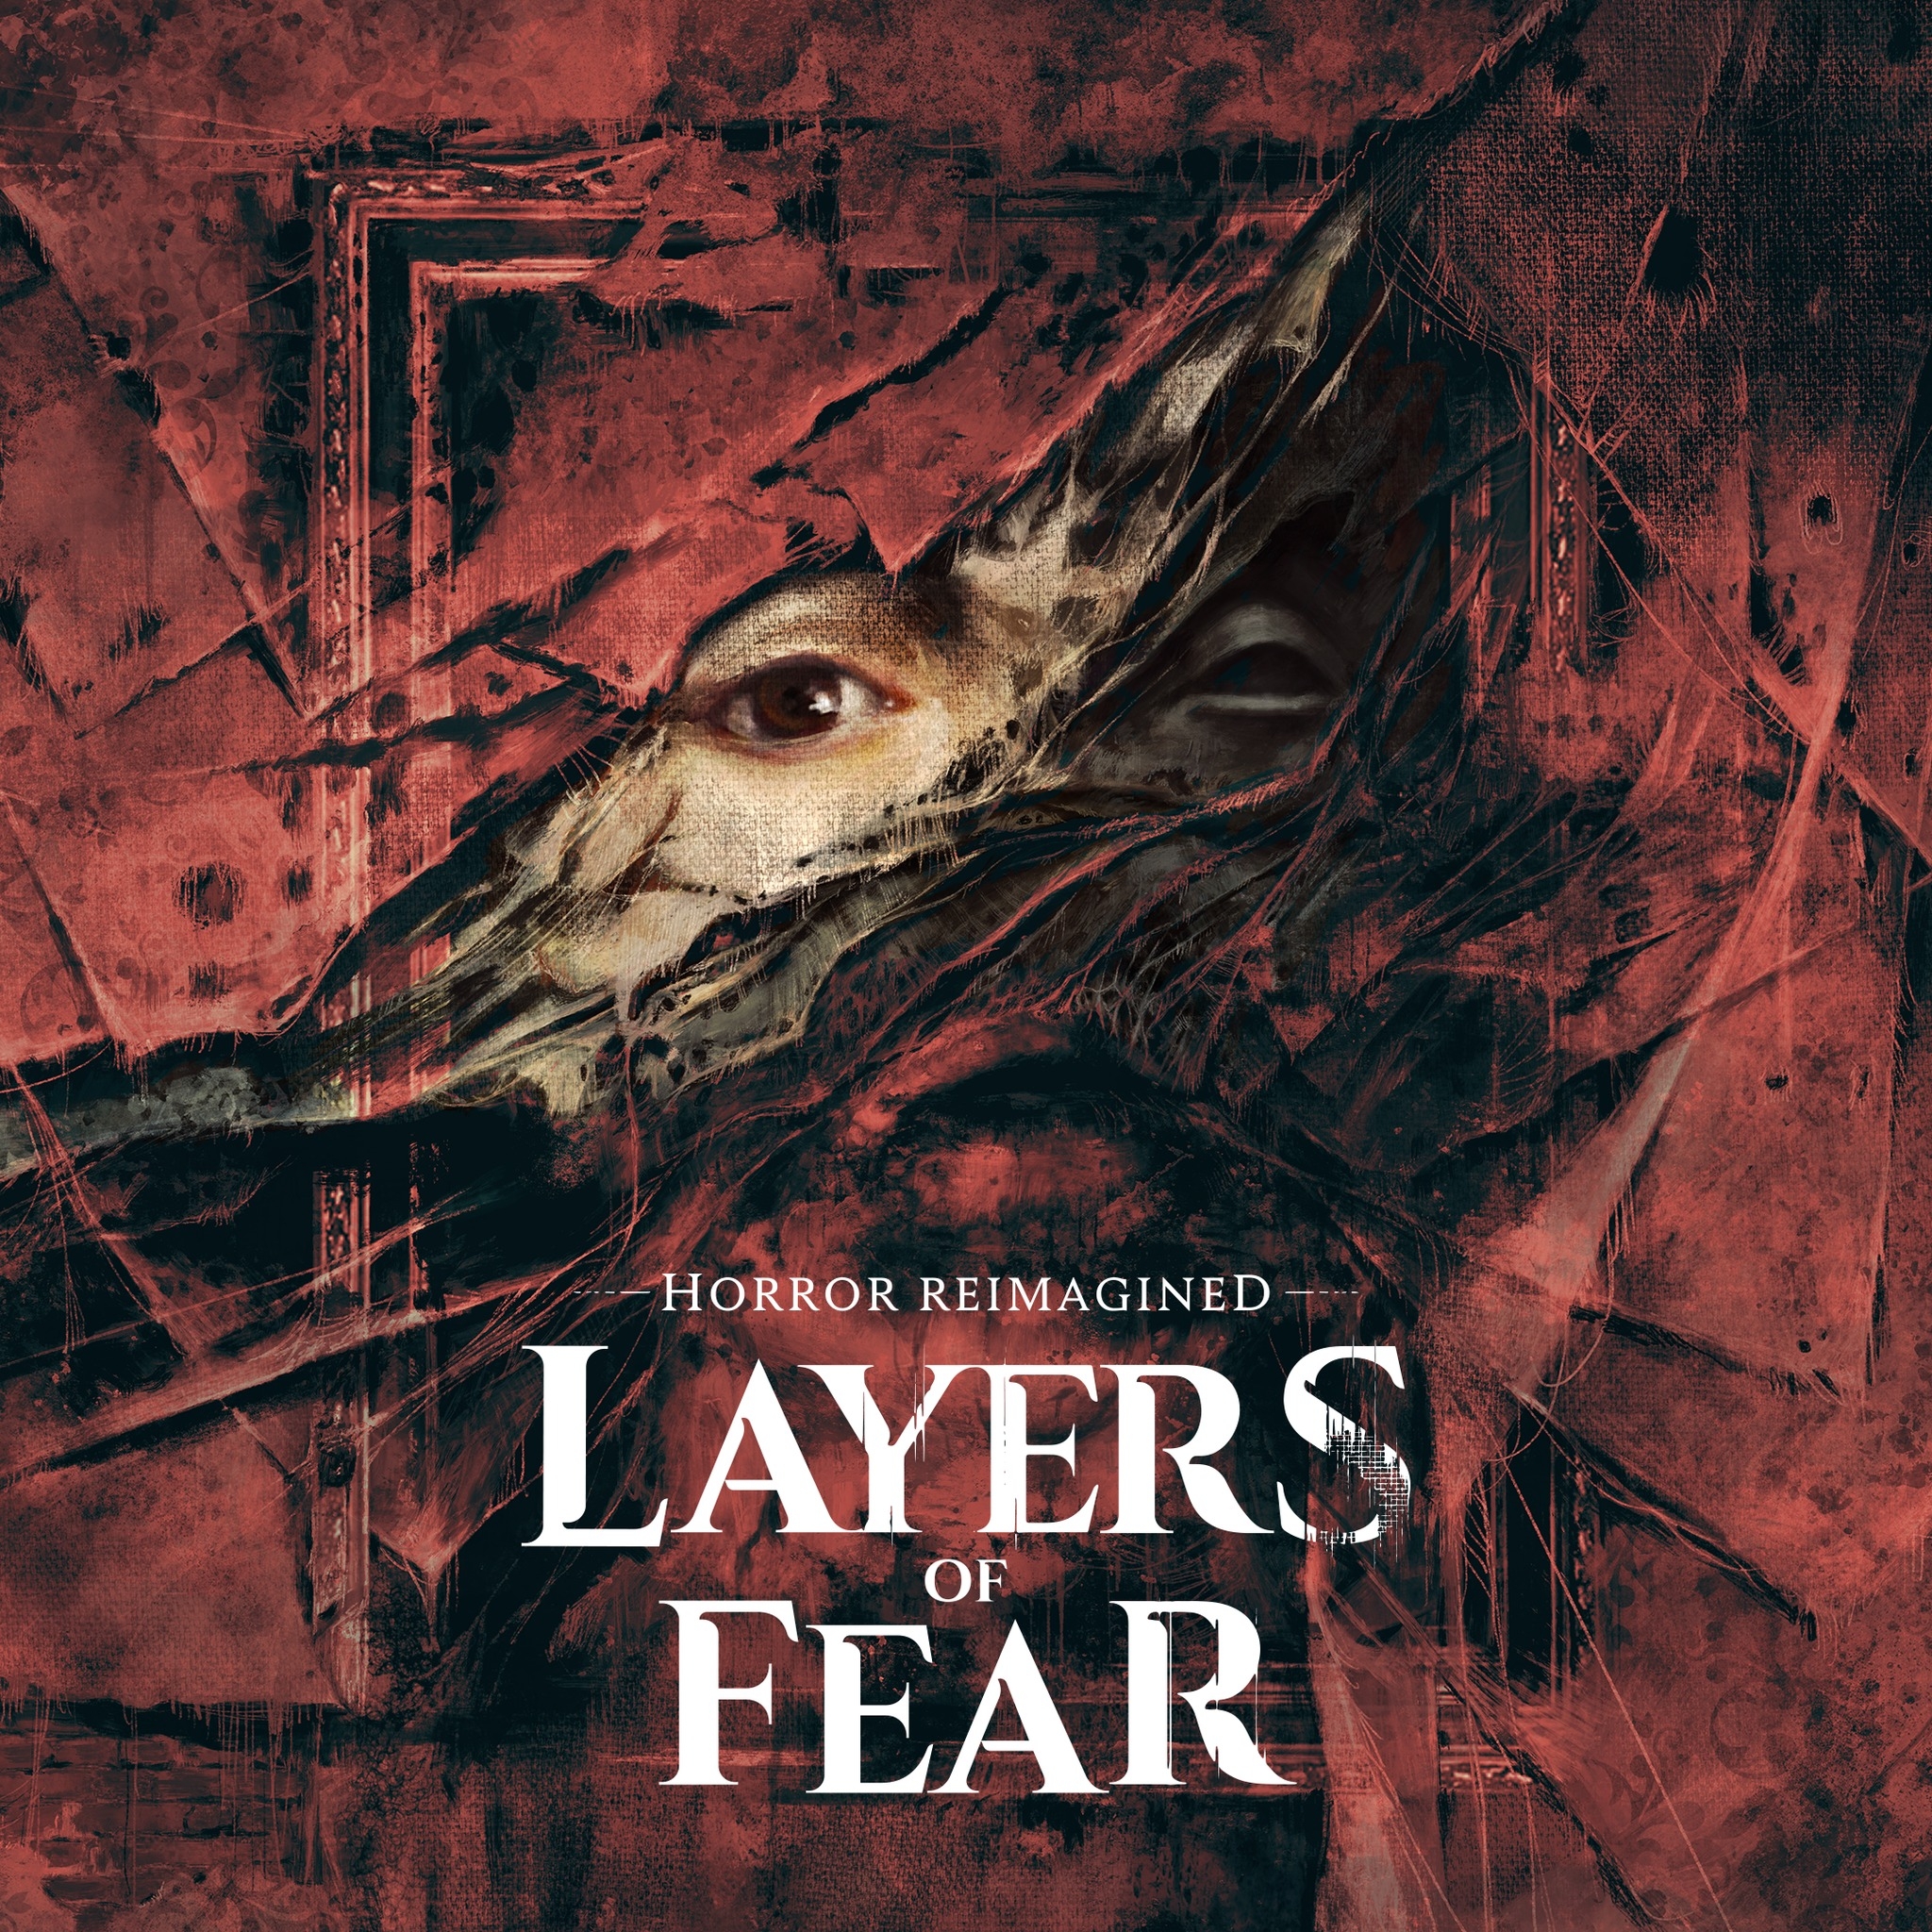 Layers of Fears is a 'psychological horror chronicle' coming in 2023